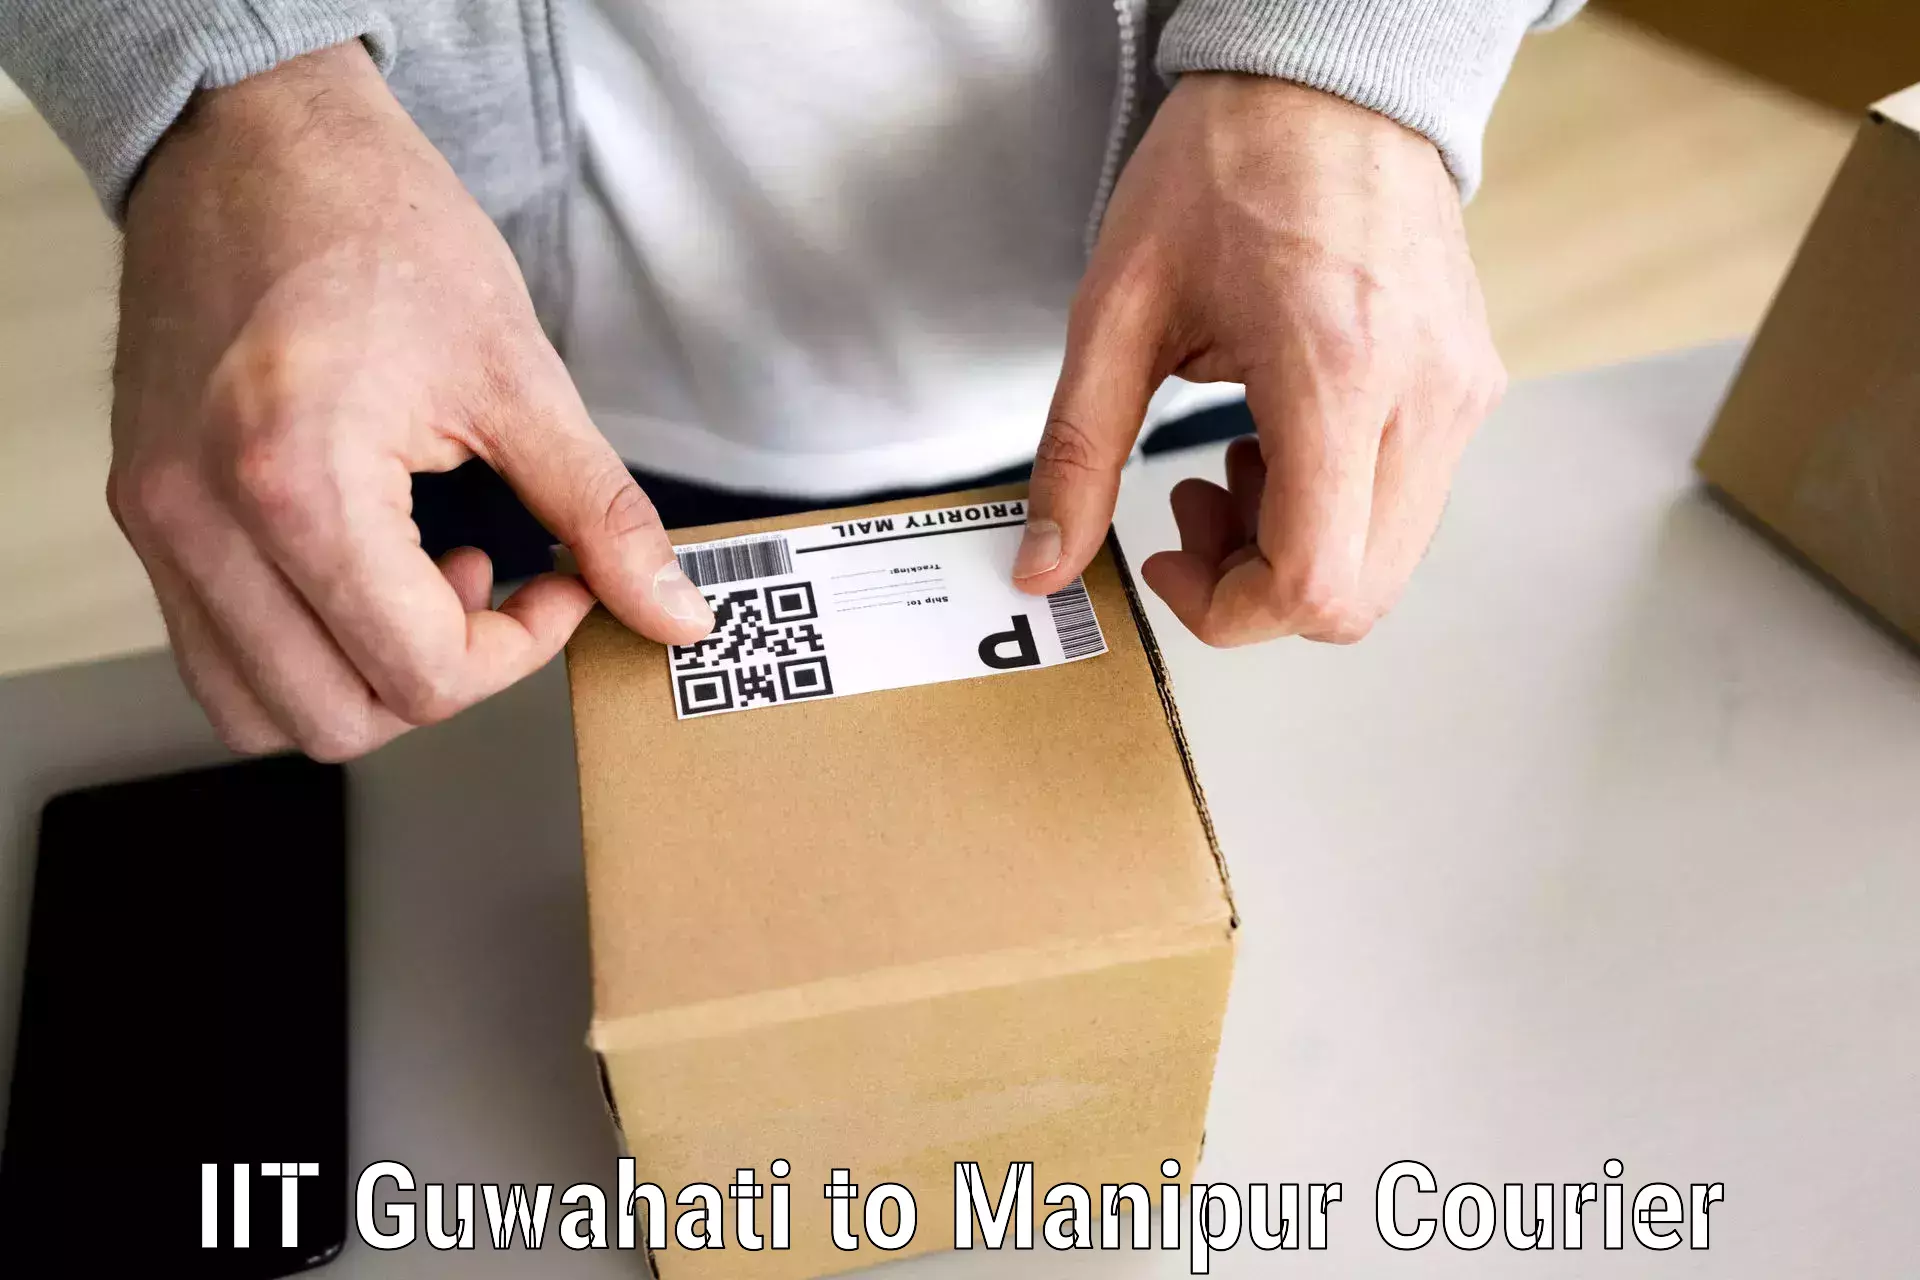 Professional movers and packers IIT Guwahati to Chandel